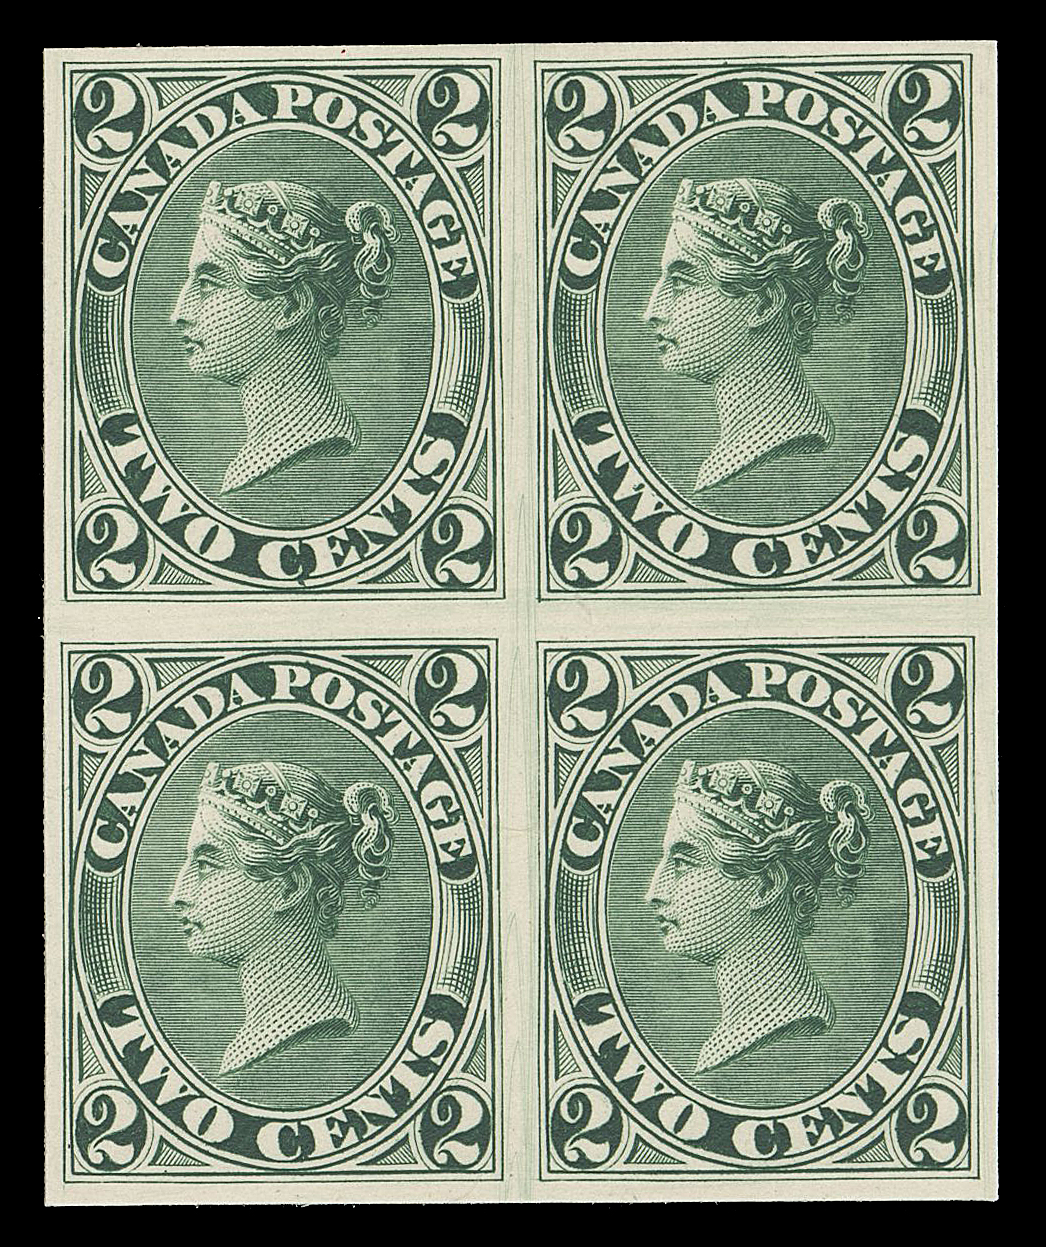 TWO CENTS  20TCii,Trial colour plate proof block printed in green on card mounted india paper, attractive and in choice condition, VF+